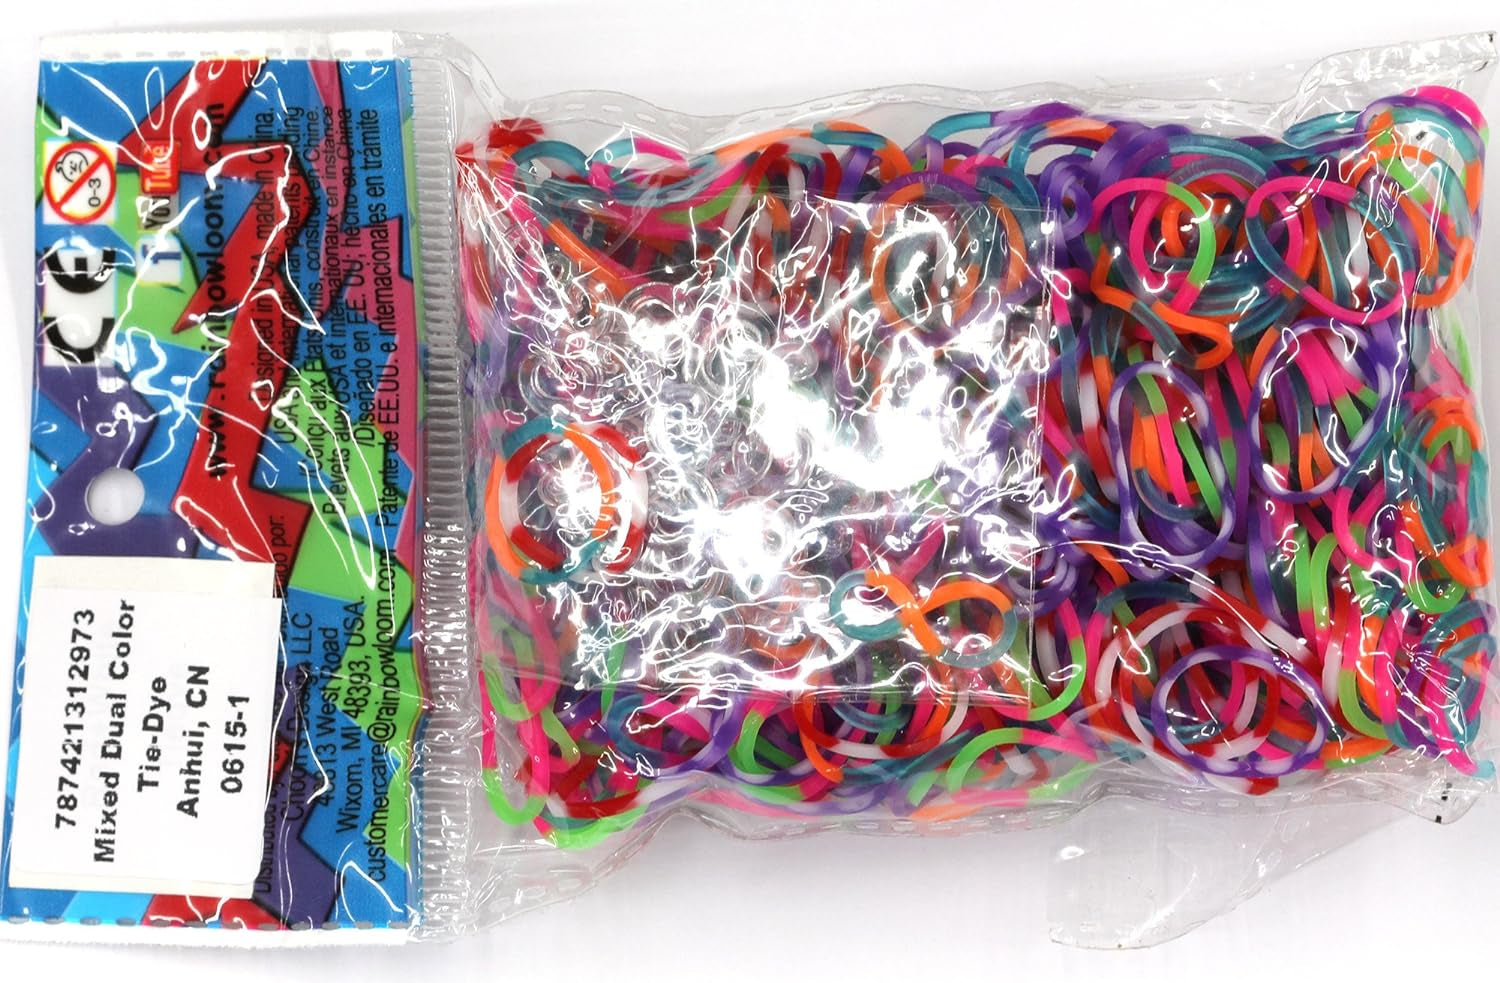 Specialty Tie-Dye Mixed Dual Color Latex-Free Refill Bands, 600 Count plus 24 C-Clips